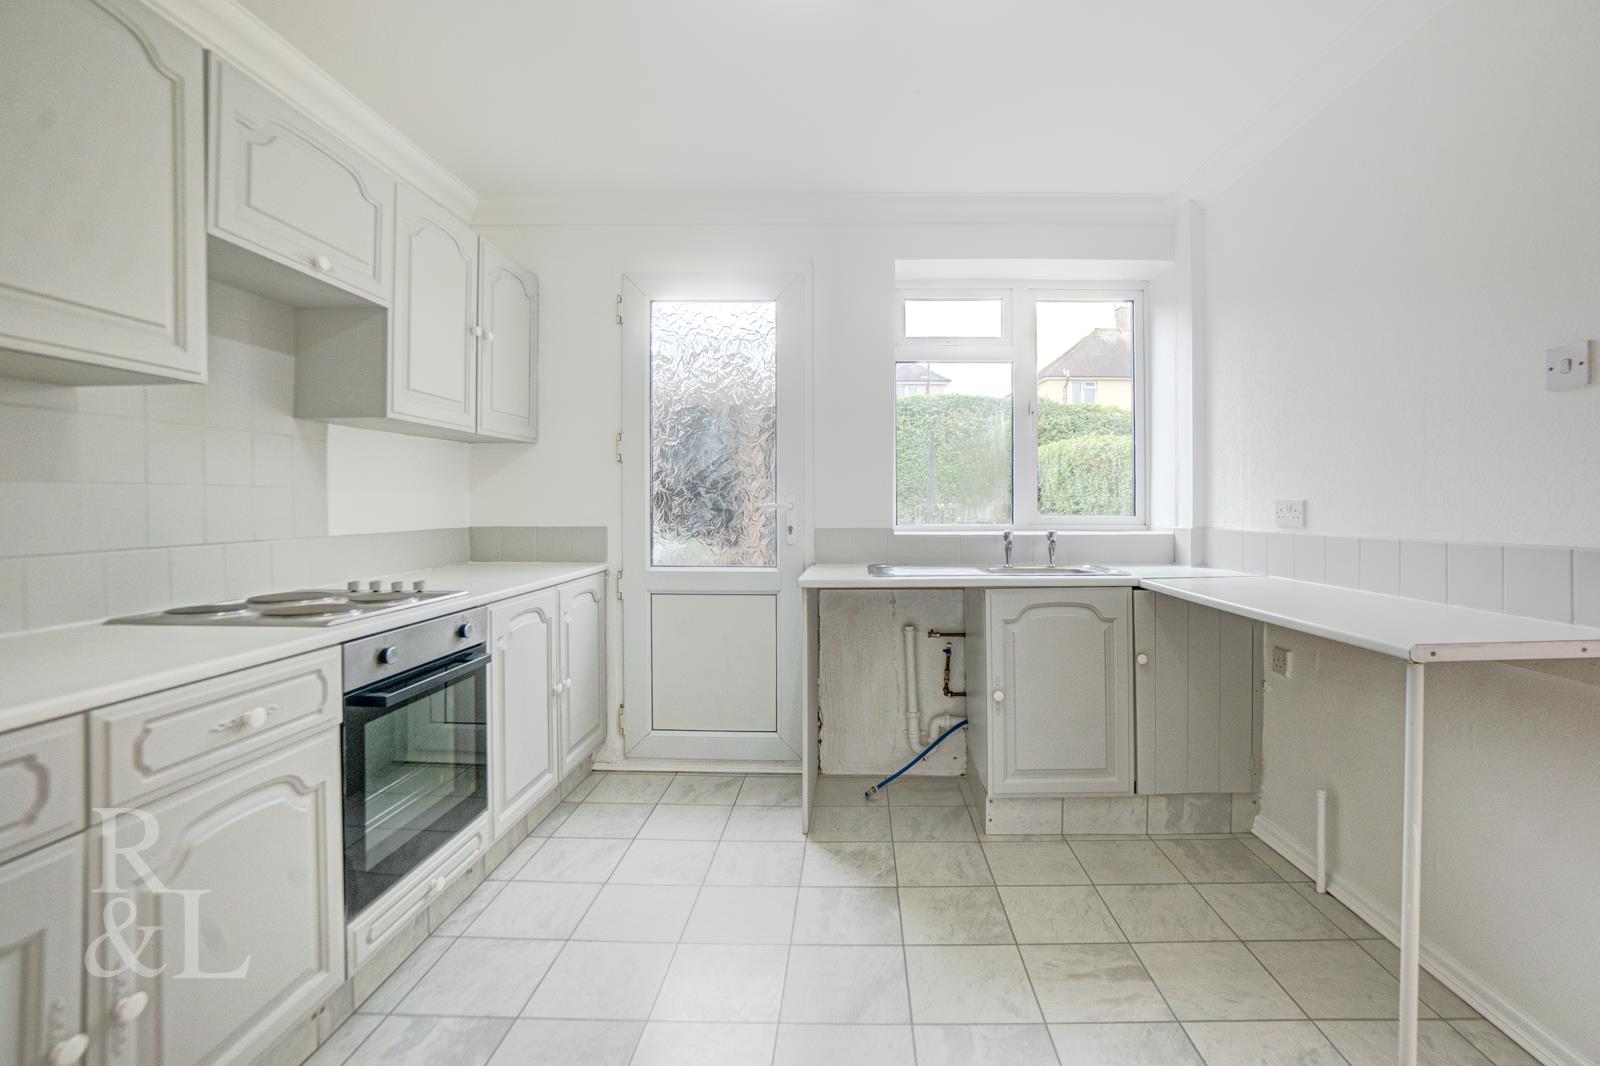 Property image for Brooksby Lane, Clifton, Nottingham